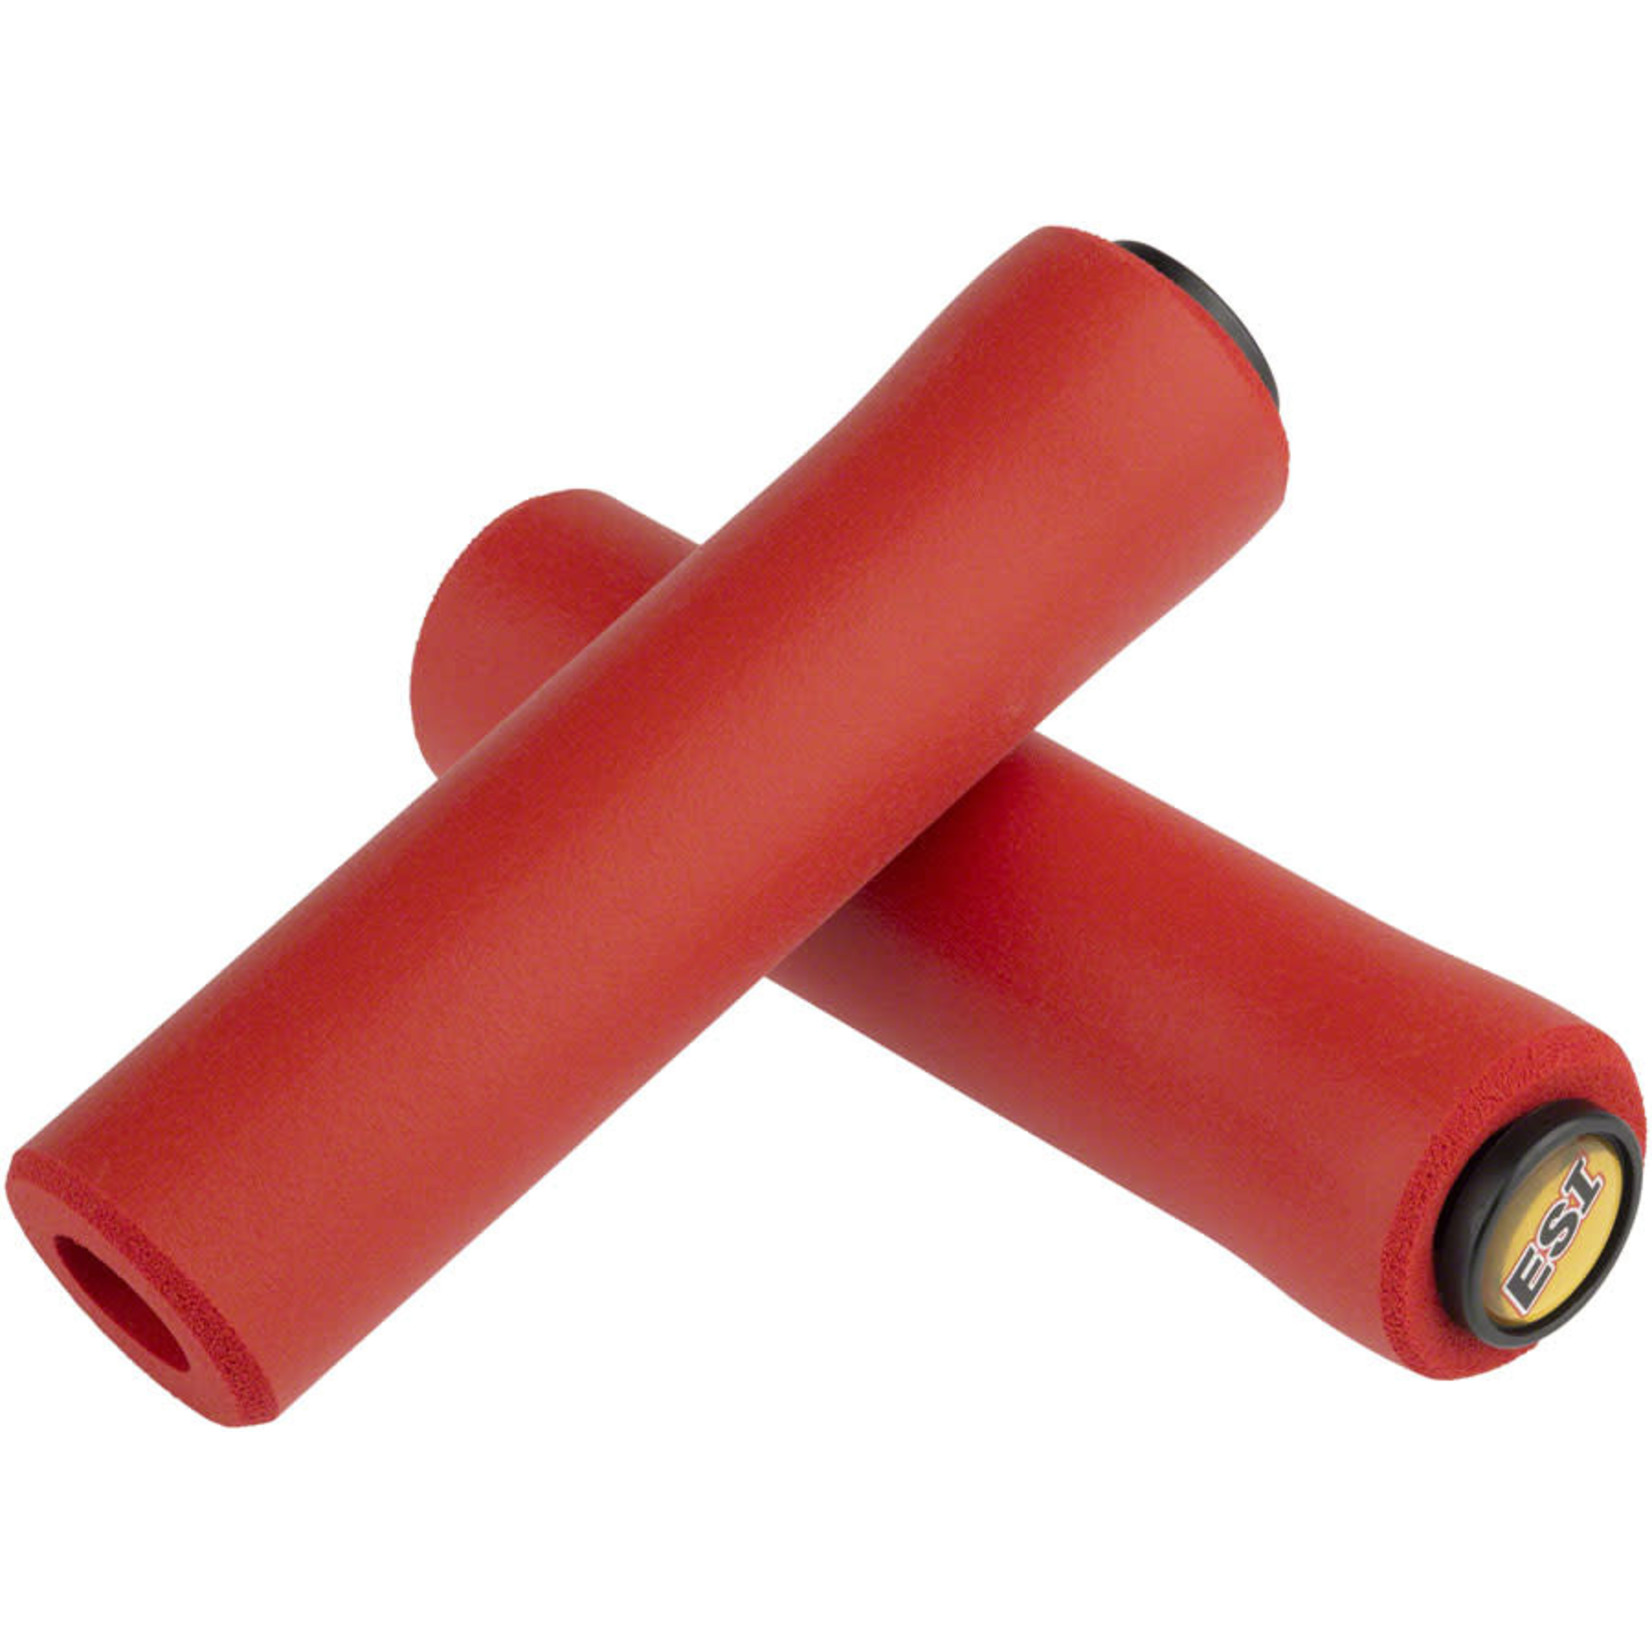 ESI Extra Chunky Grips - Red